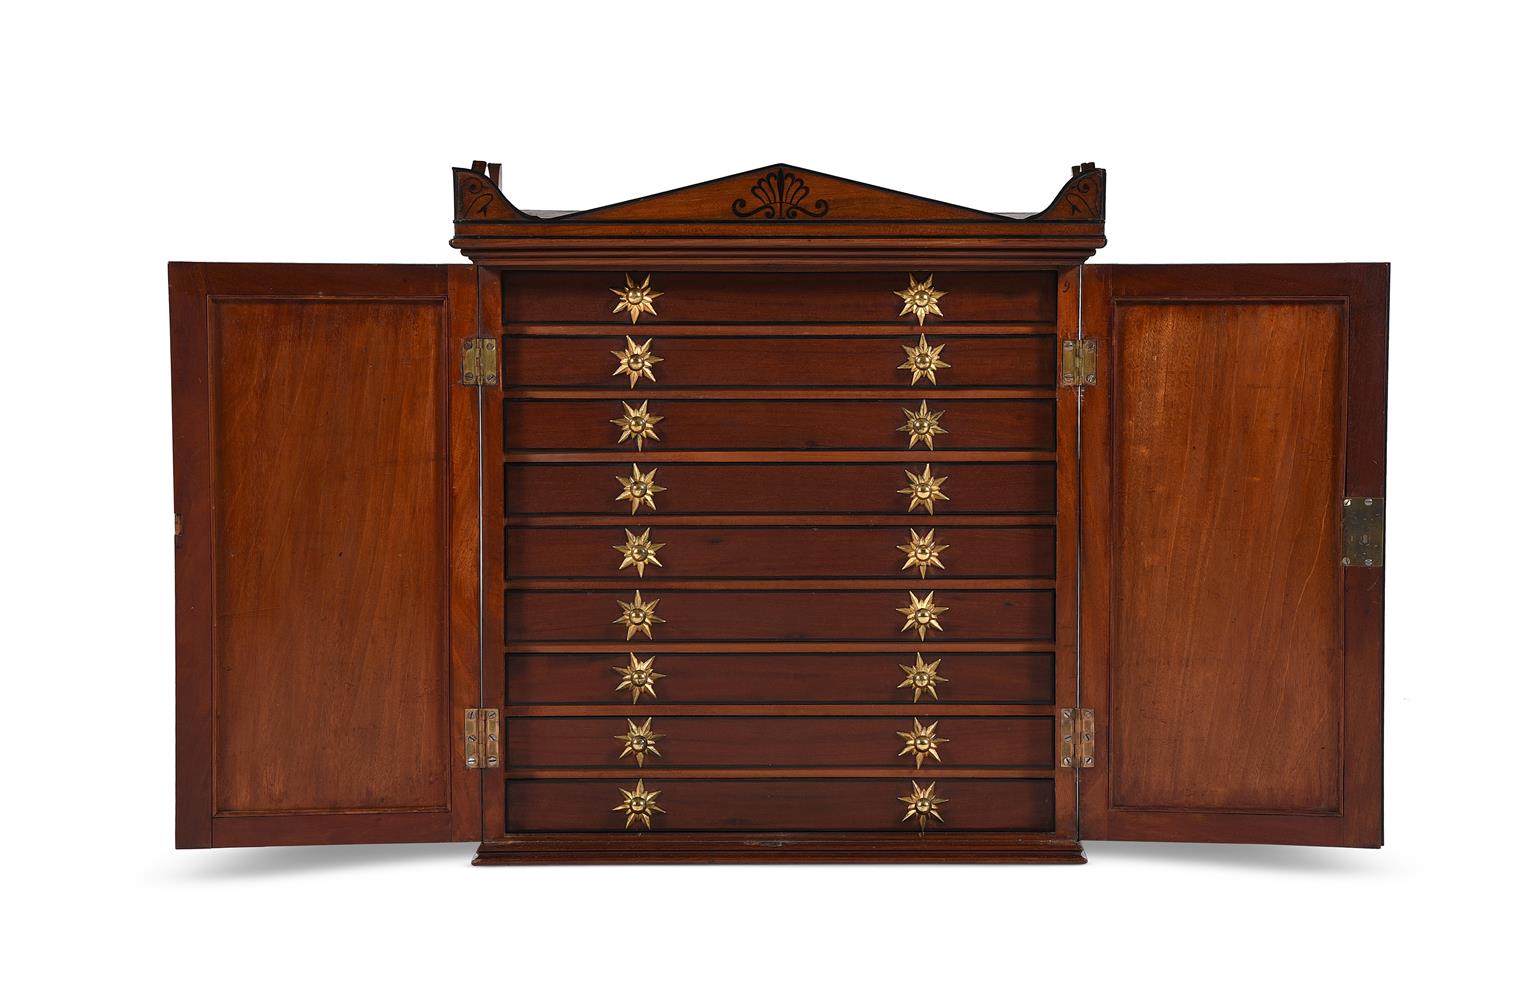 Y A REGENCY MAHOGANY AND EBONY INLAID COLLECTORS CABINET, EARLY 19TH CENTURY - Image 2 of 9